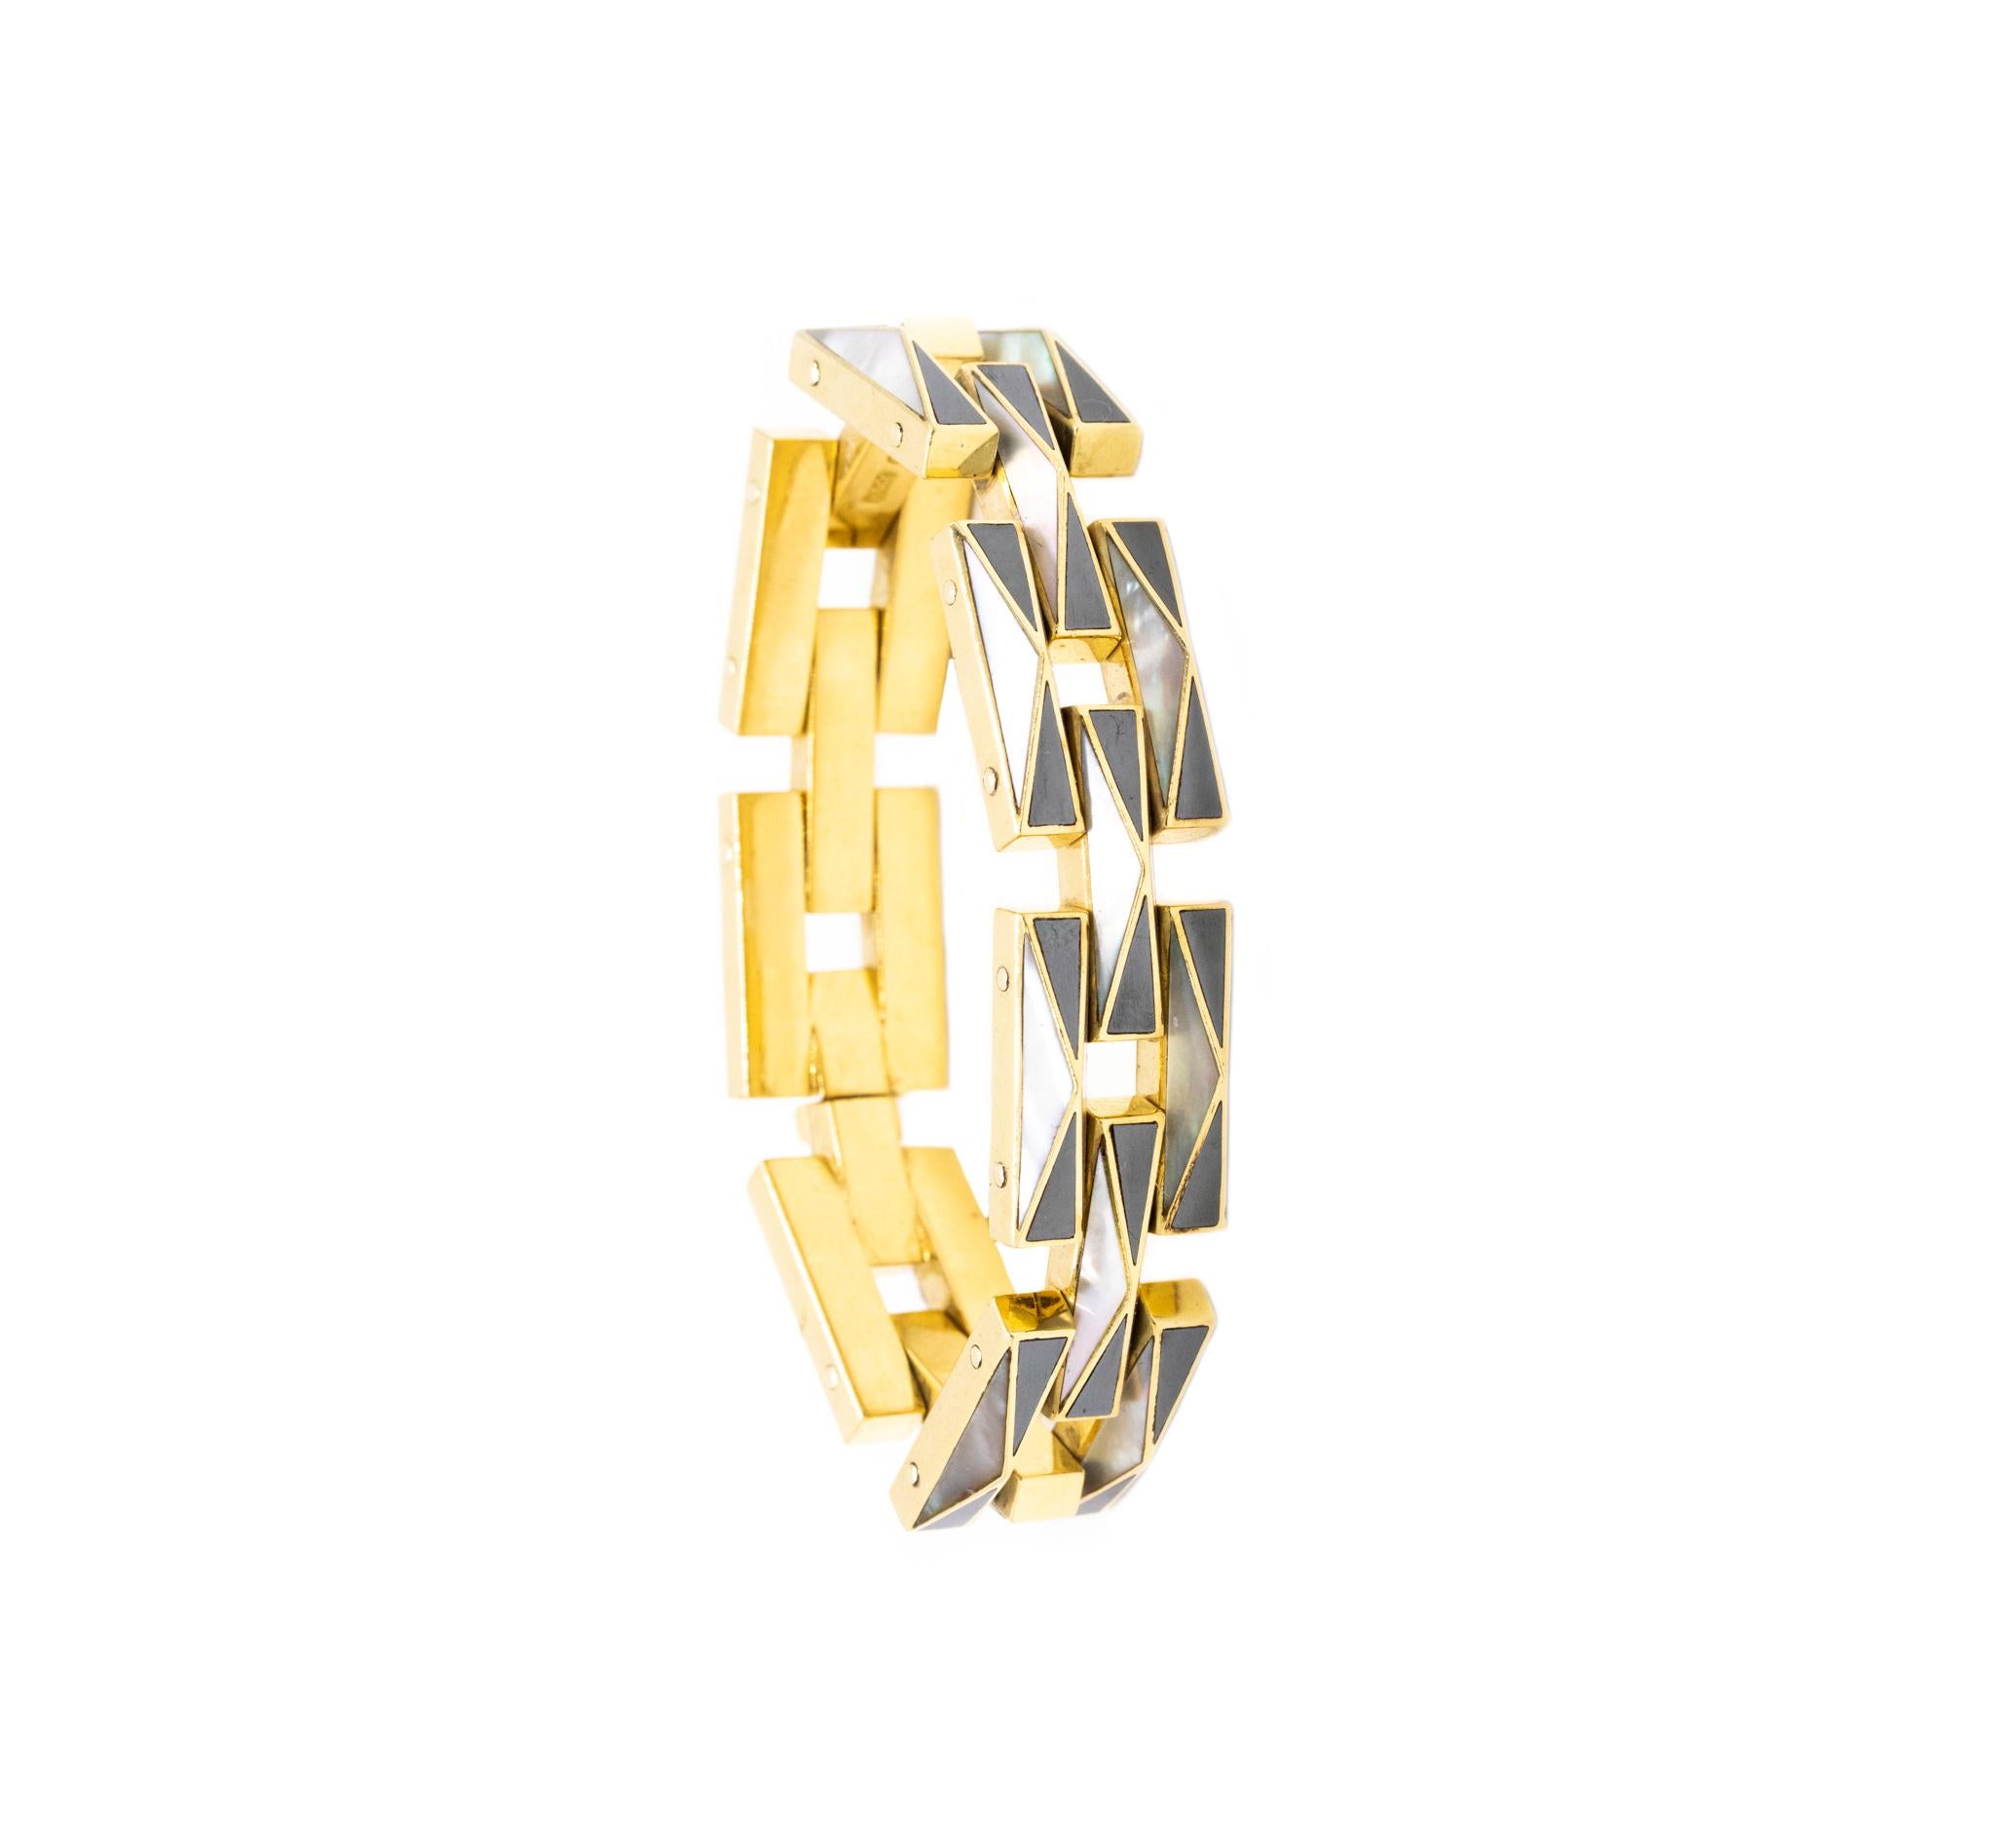 Geometric bracelet designed by Angela Cummings for Tiffany & Co..

A rare vintage bracelet, designed by Angela Cummings at the Tiffany & Co. studios in New York back in the1982. This one-of-a-kind bracelet was carefully crafted in solid yellow gold